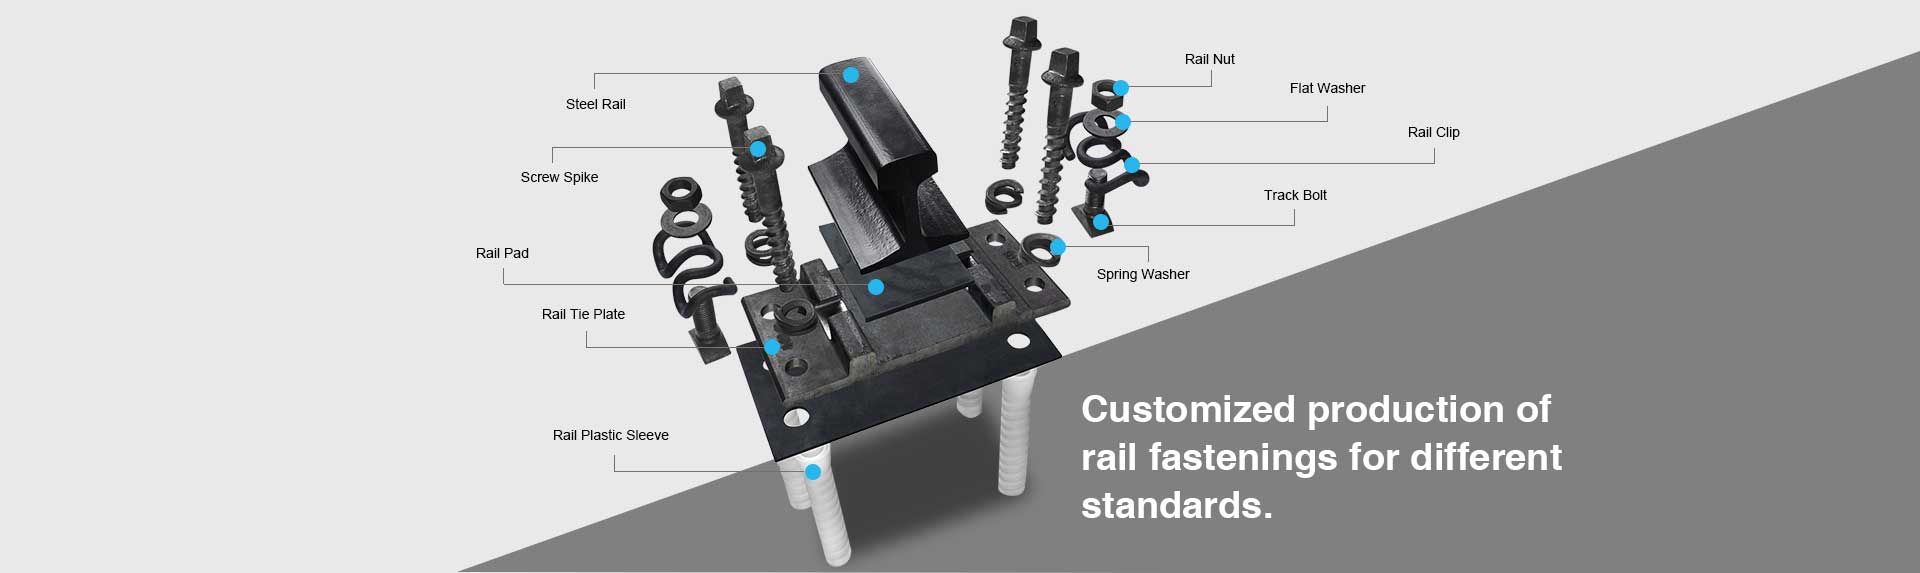 customized production of rail fasteners for various standards